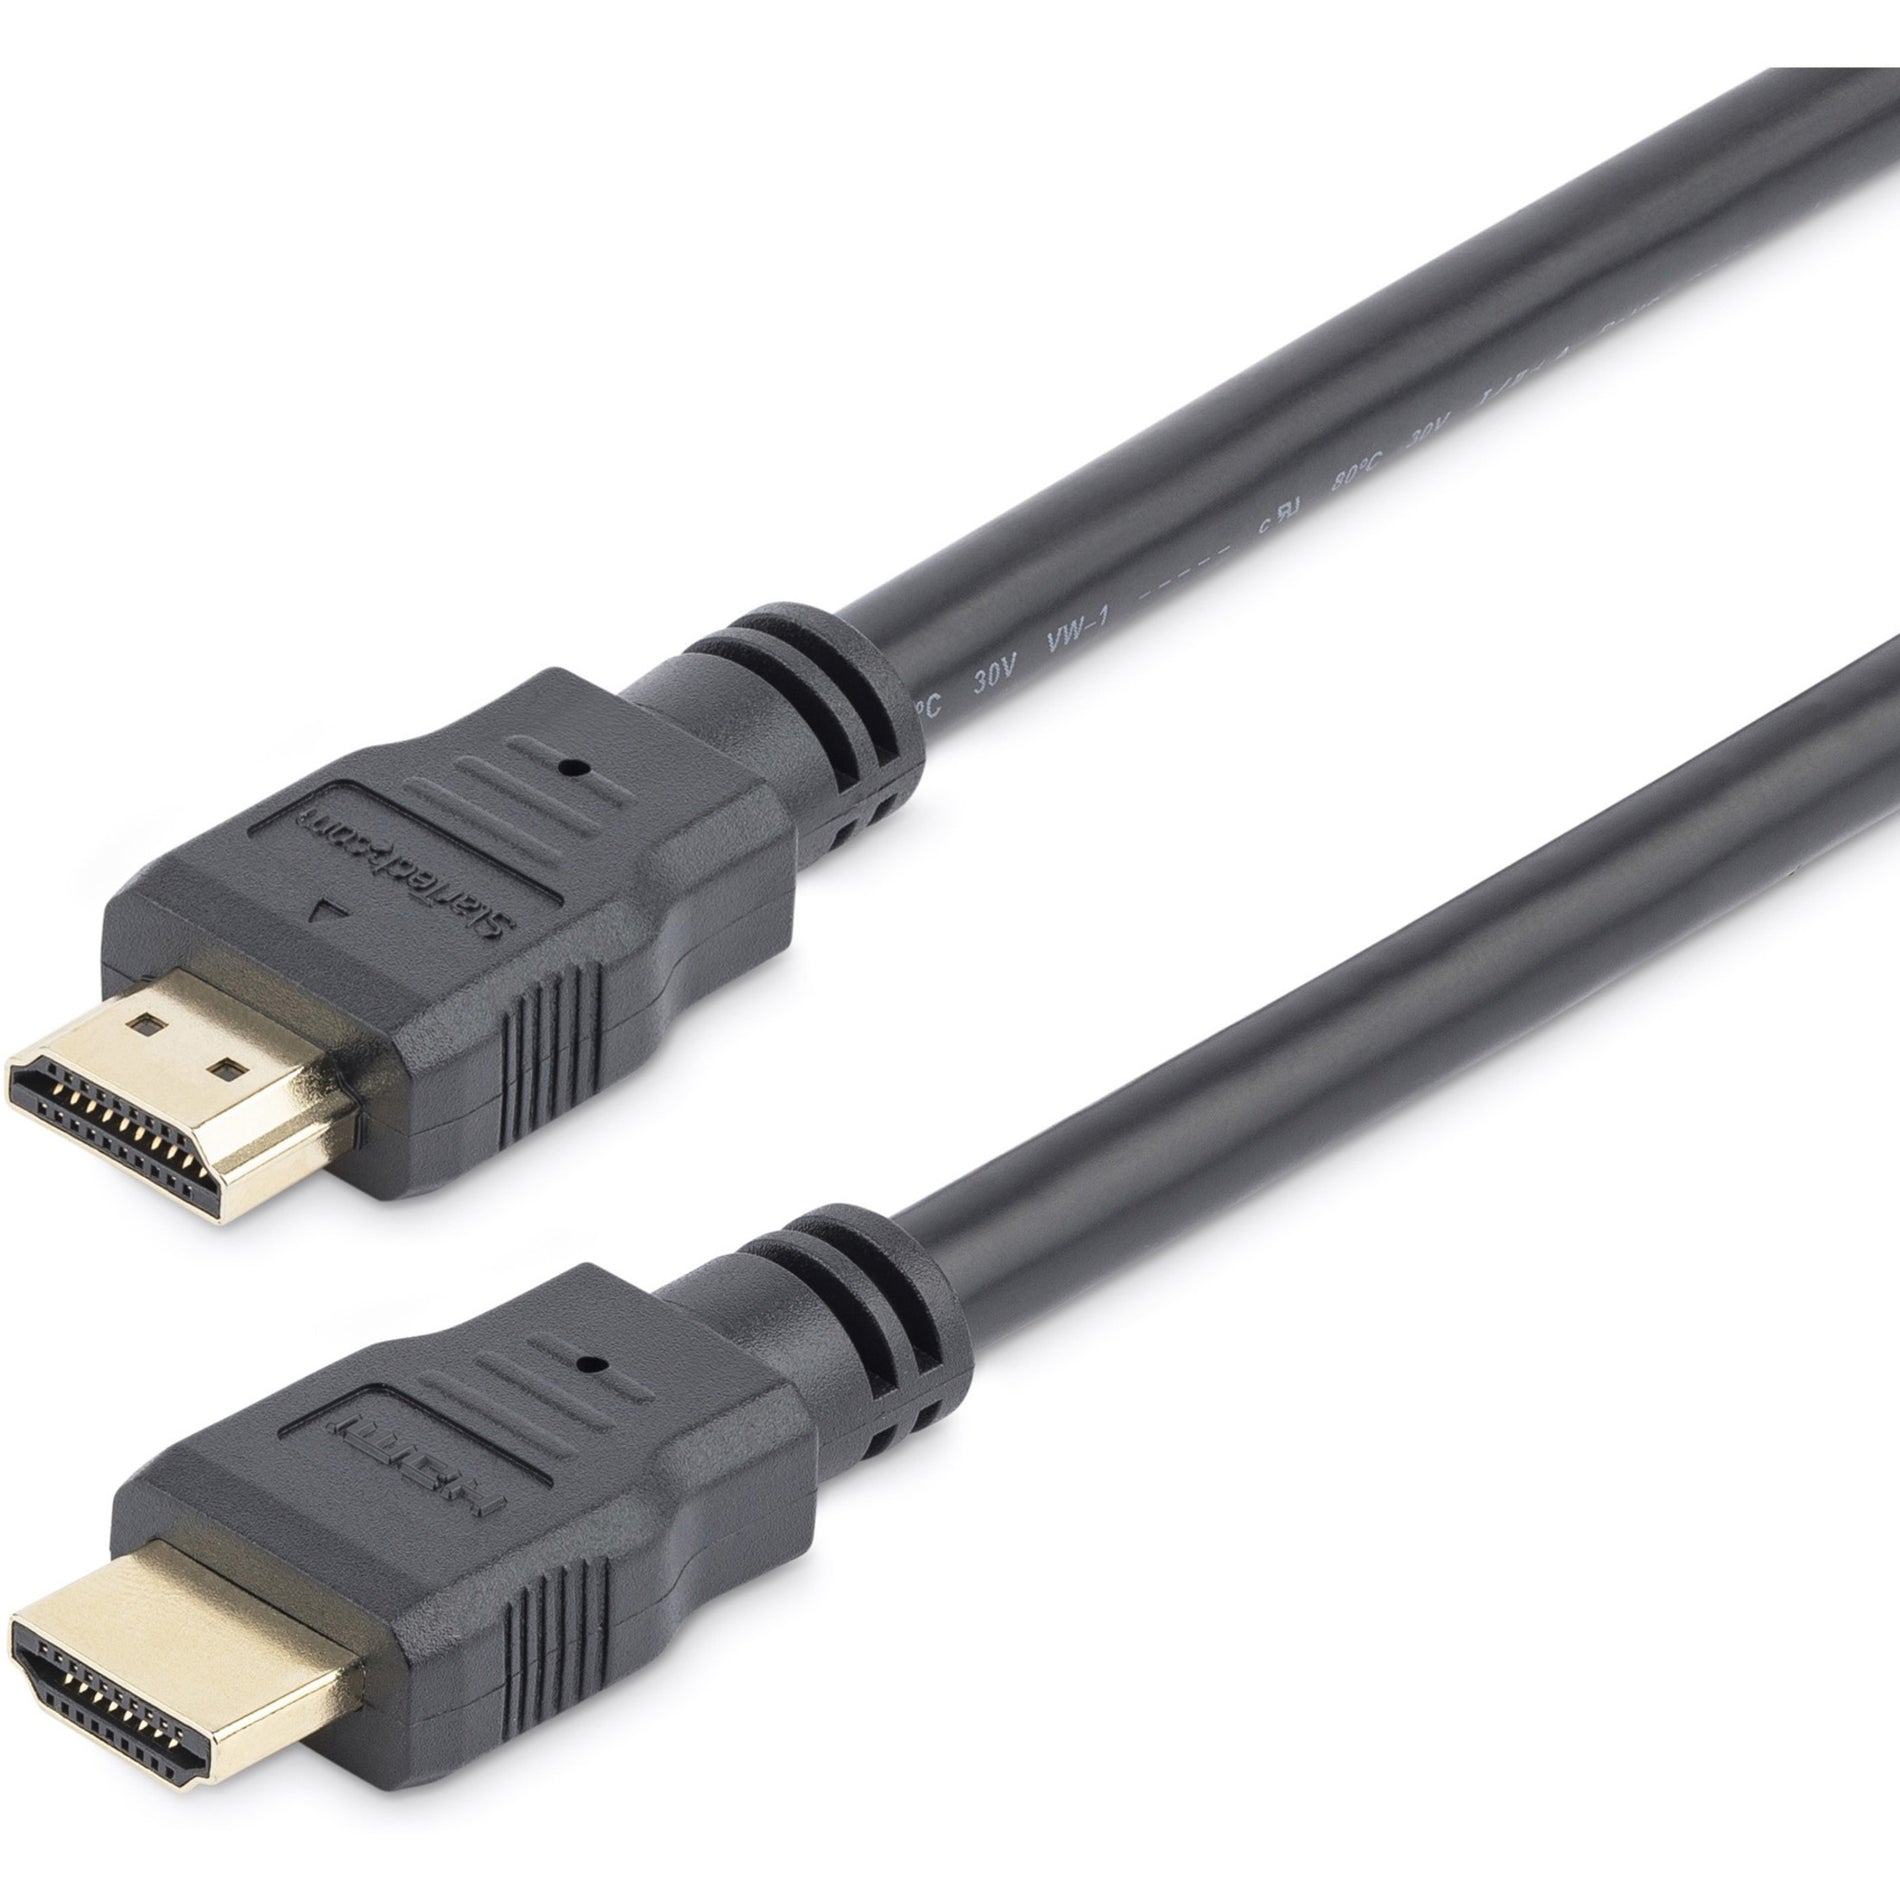 StarTech.com HDMM30CM 0.3m (1ft) Short High Speed HDMI Cable, HDMI to HDMI, M/M - Ideal for Smartphones, Tablets, Cameras, and Notebooks